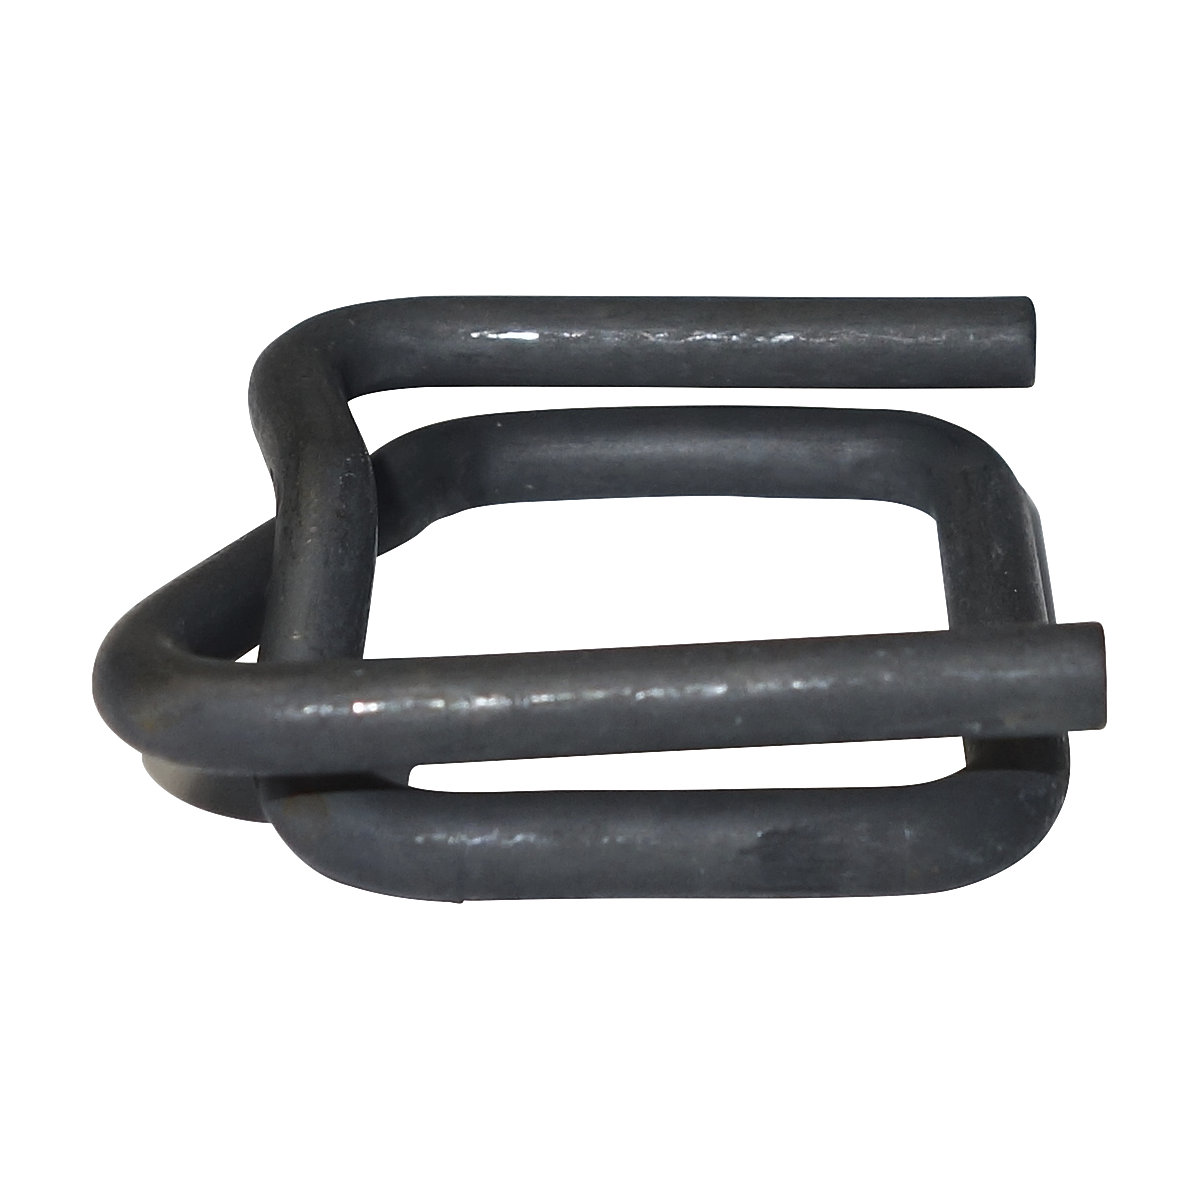 Fastening clips, phosphate coated, for composite strapping or reinforced PET strapping, width 25 mm, pack of 500-4